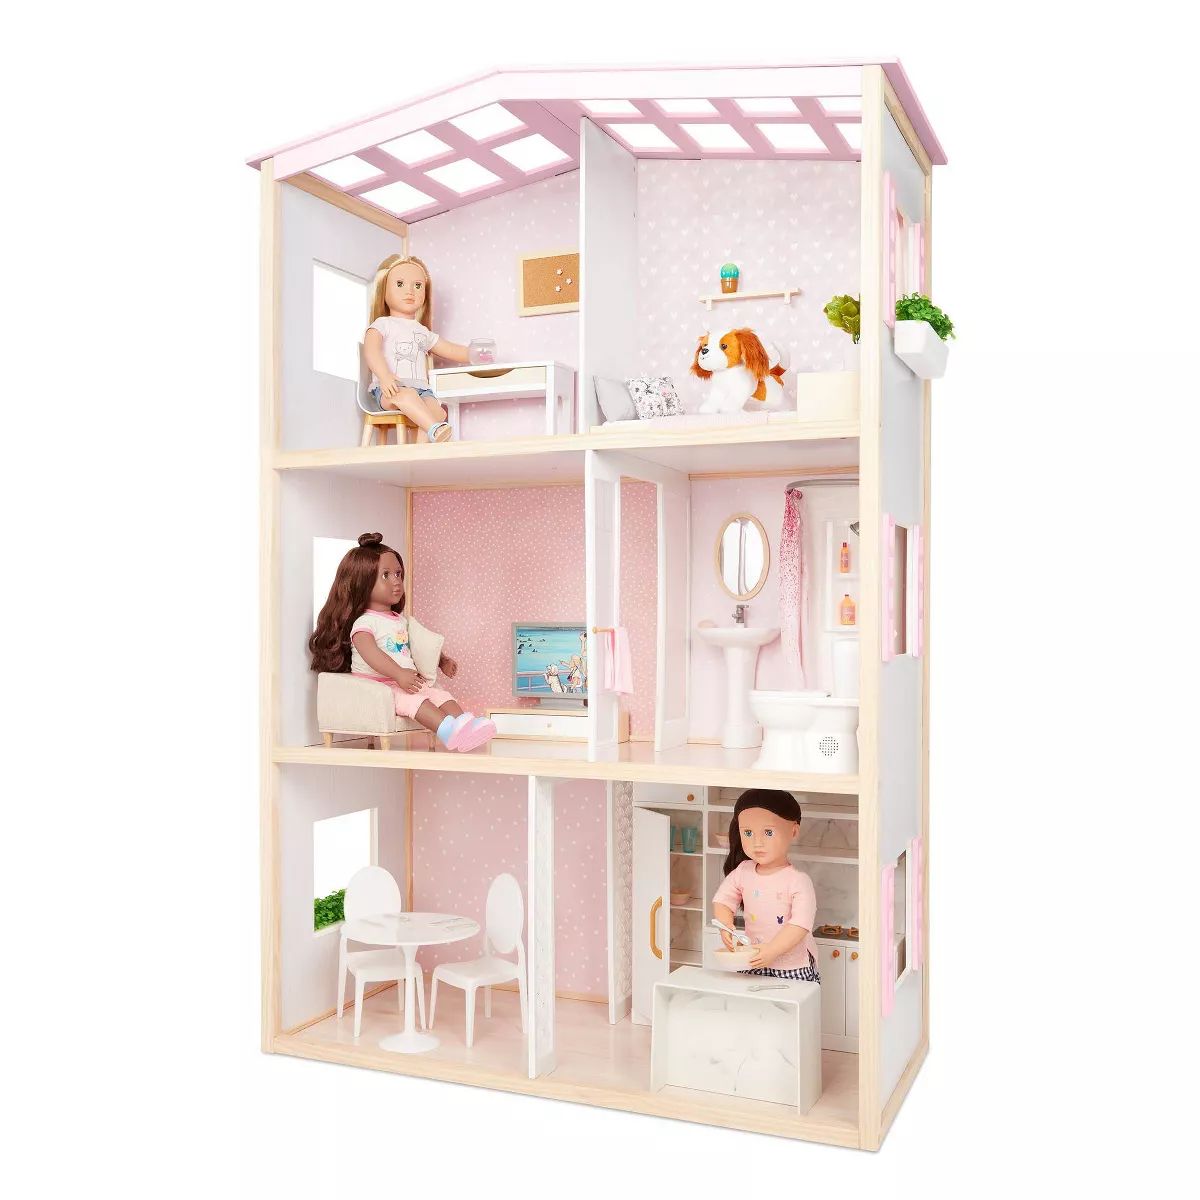 Our Generation Sweet Home Dollhouse & Furniture Playset for 18" Dolls | Target